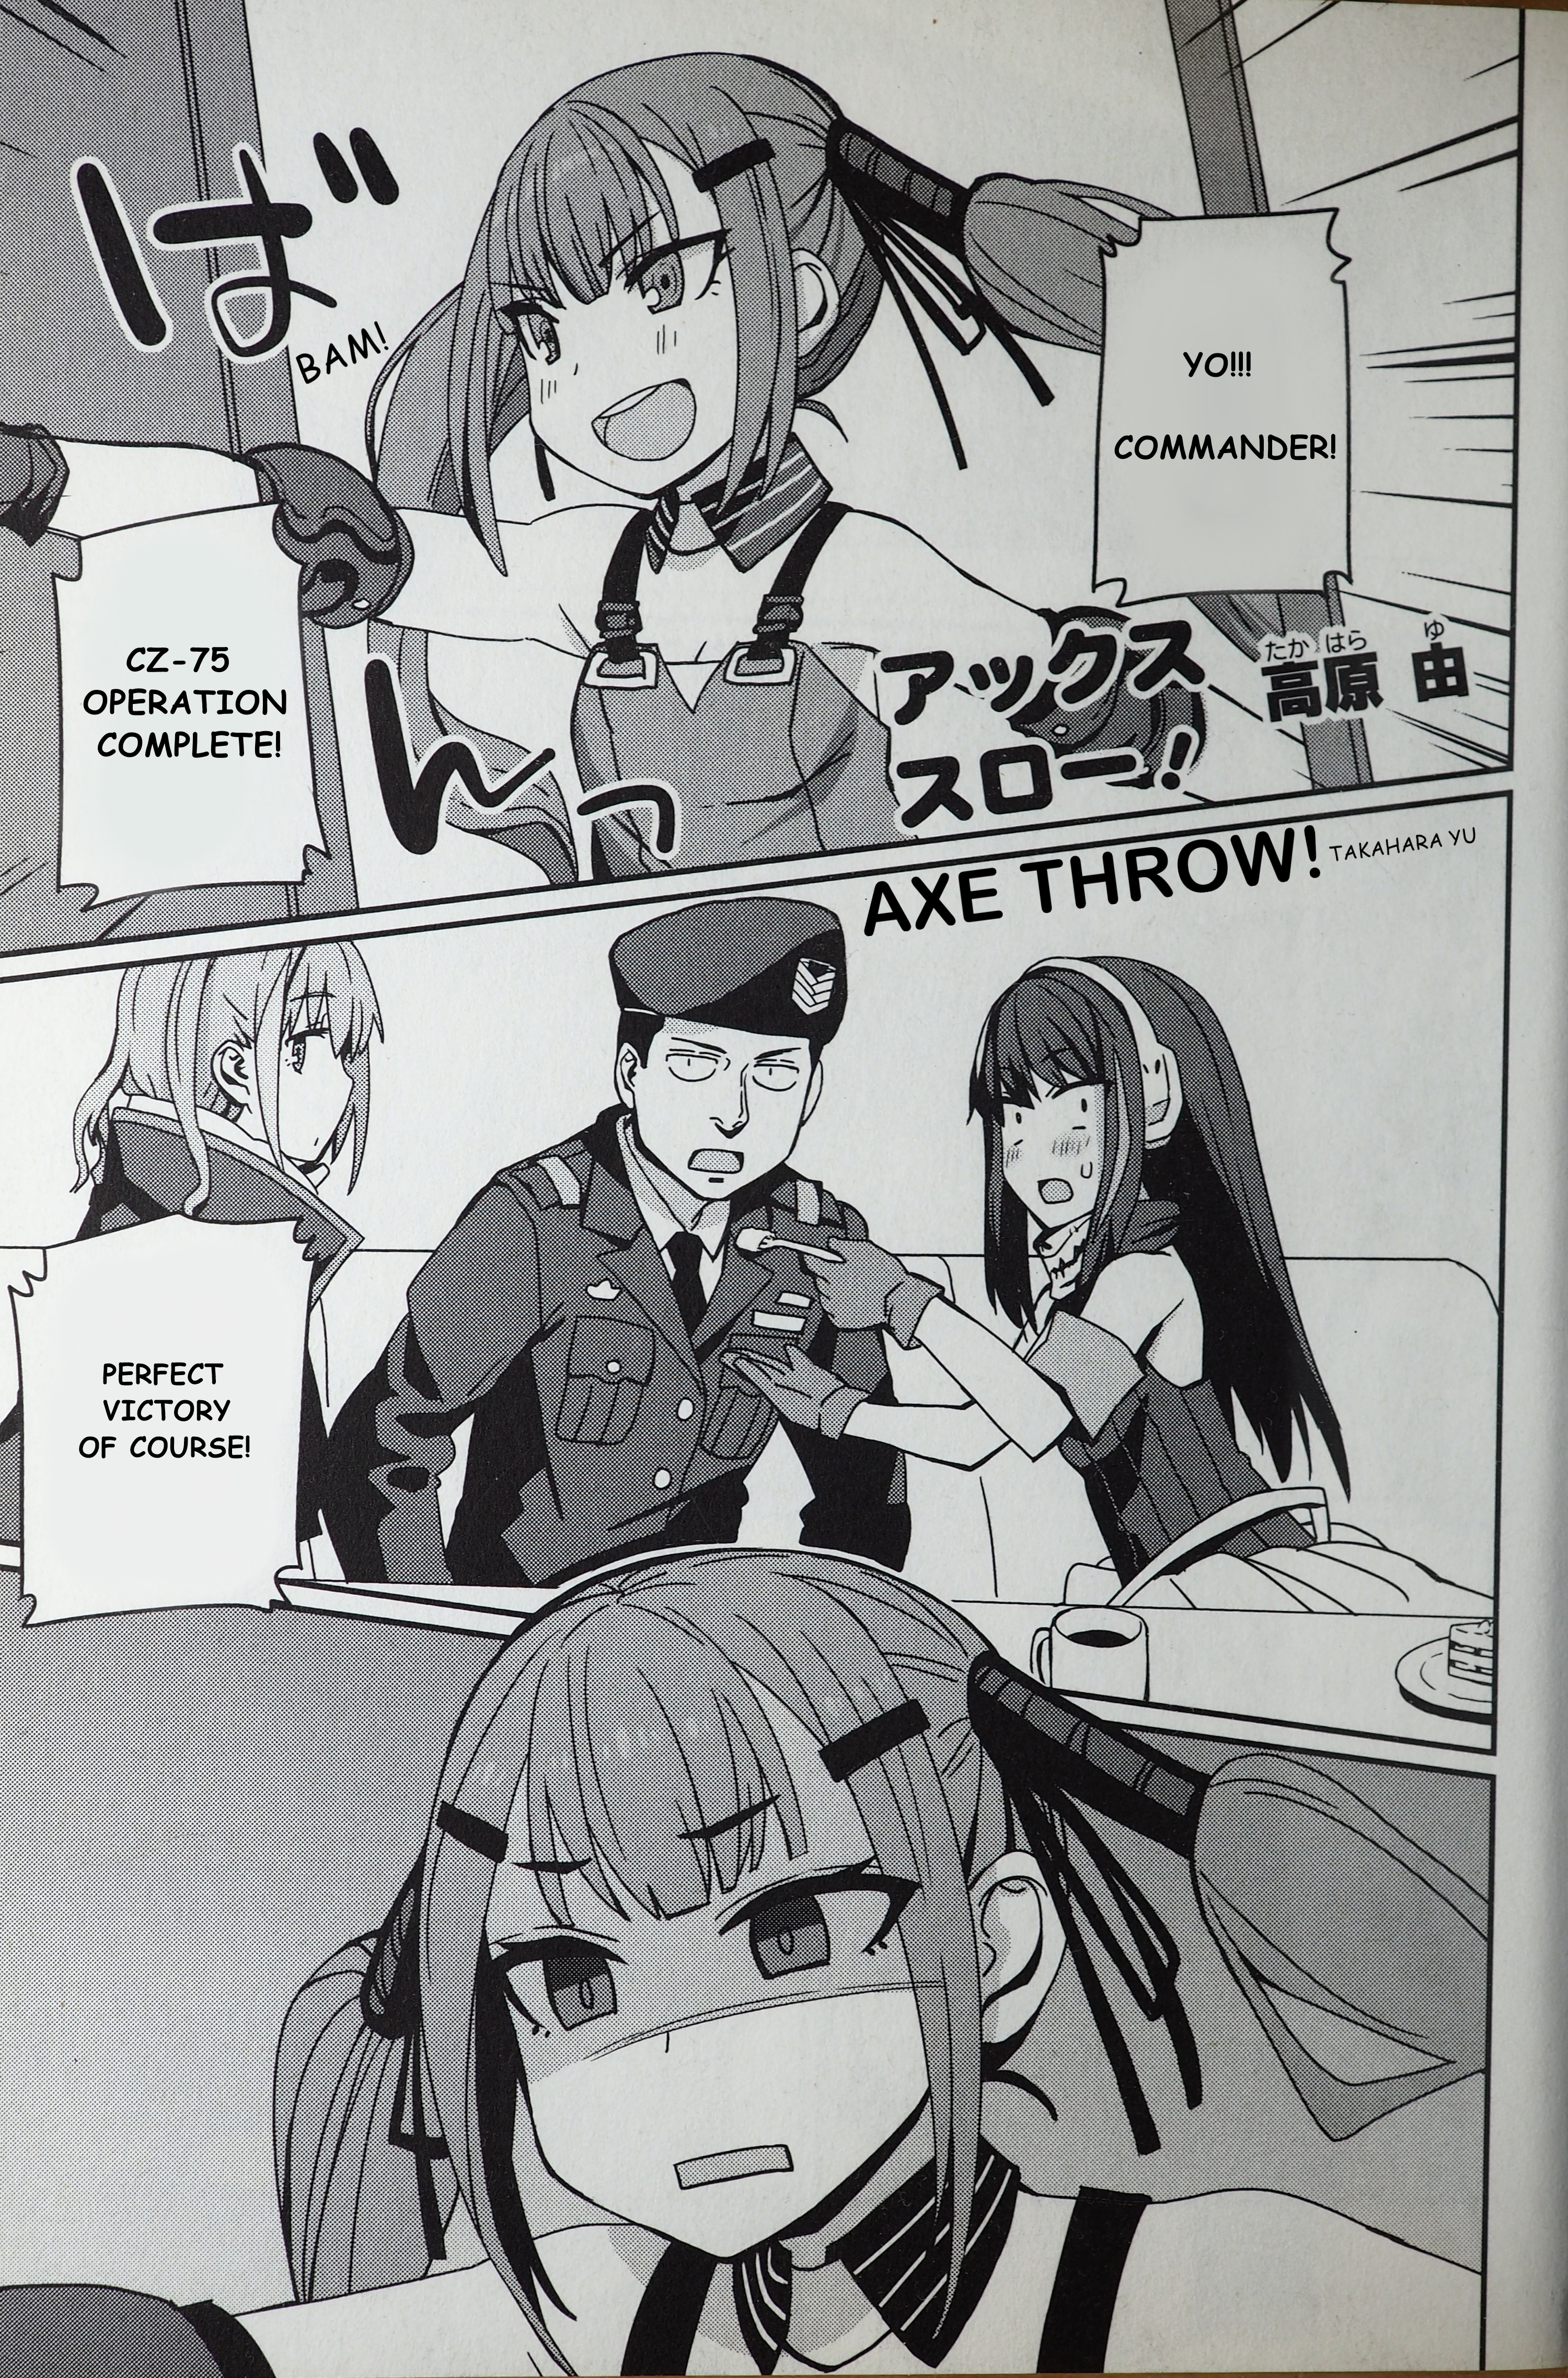 Dolls Frontline Comic Anthology - DNA Media 2019 - Chapter 14541 - Axe Throw! - Image 1